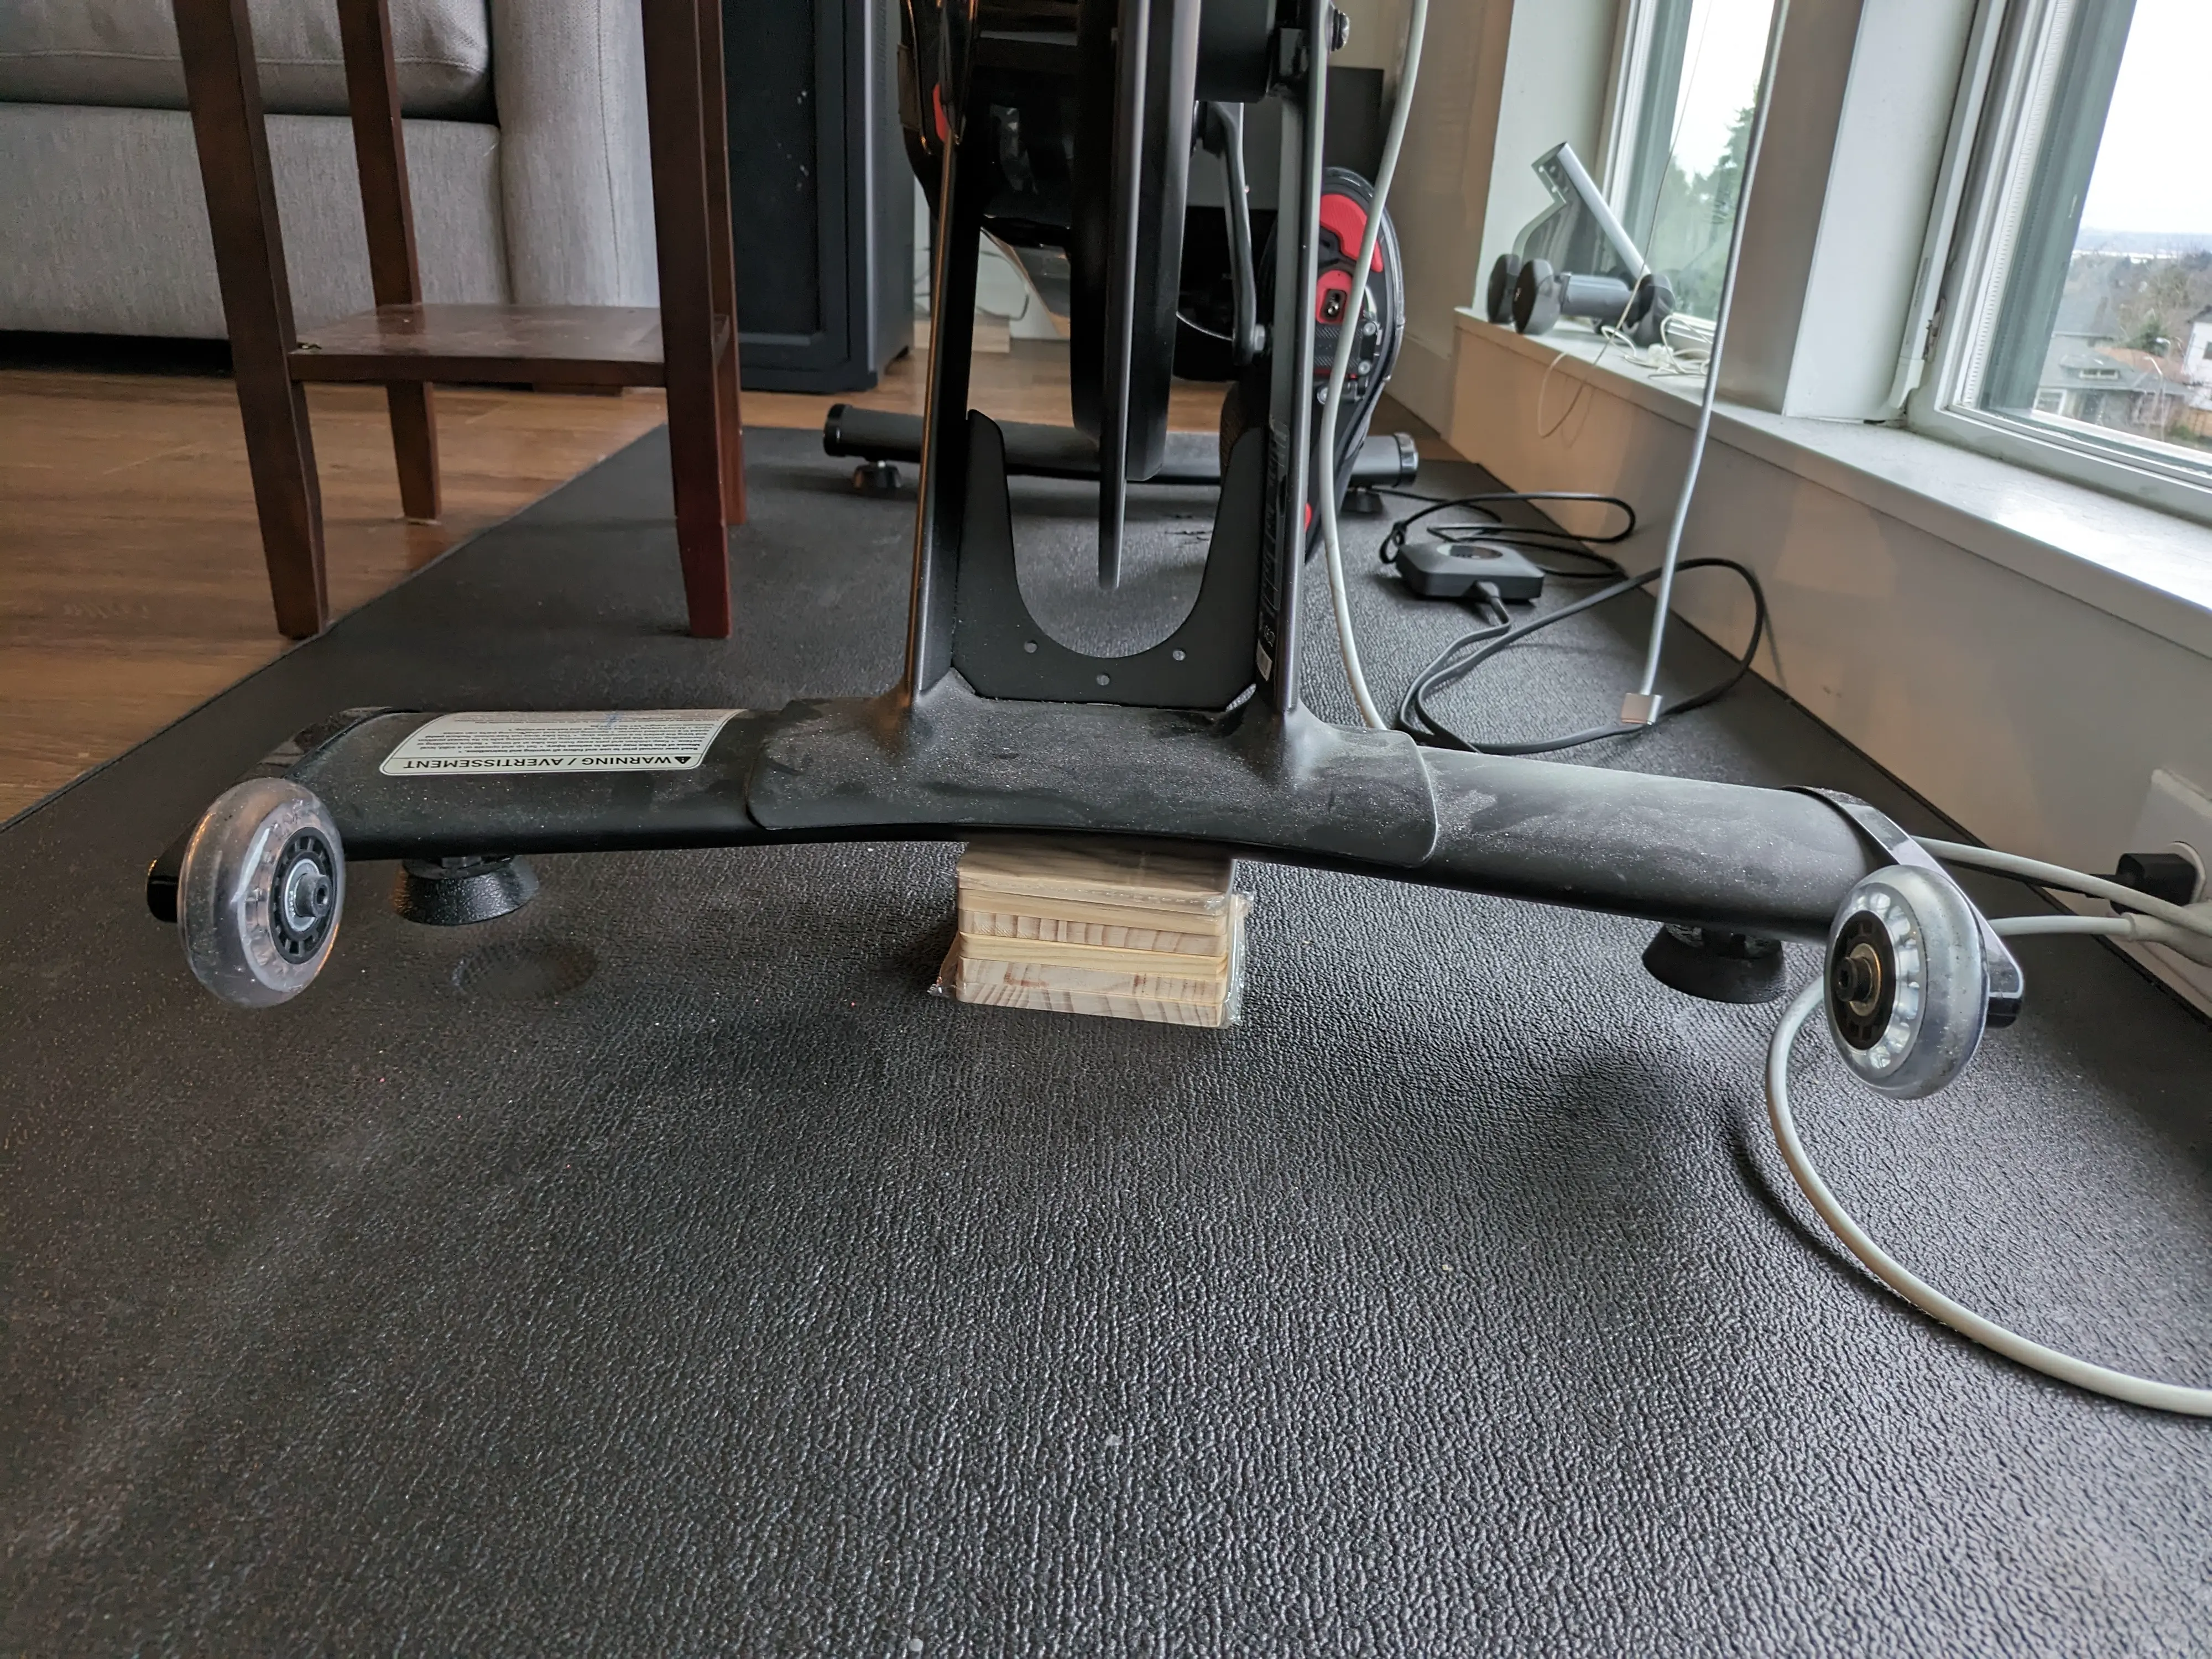 Image showing the coasters in a pile, supporting the weight of a Peloton stationary cycling machine.